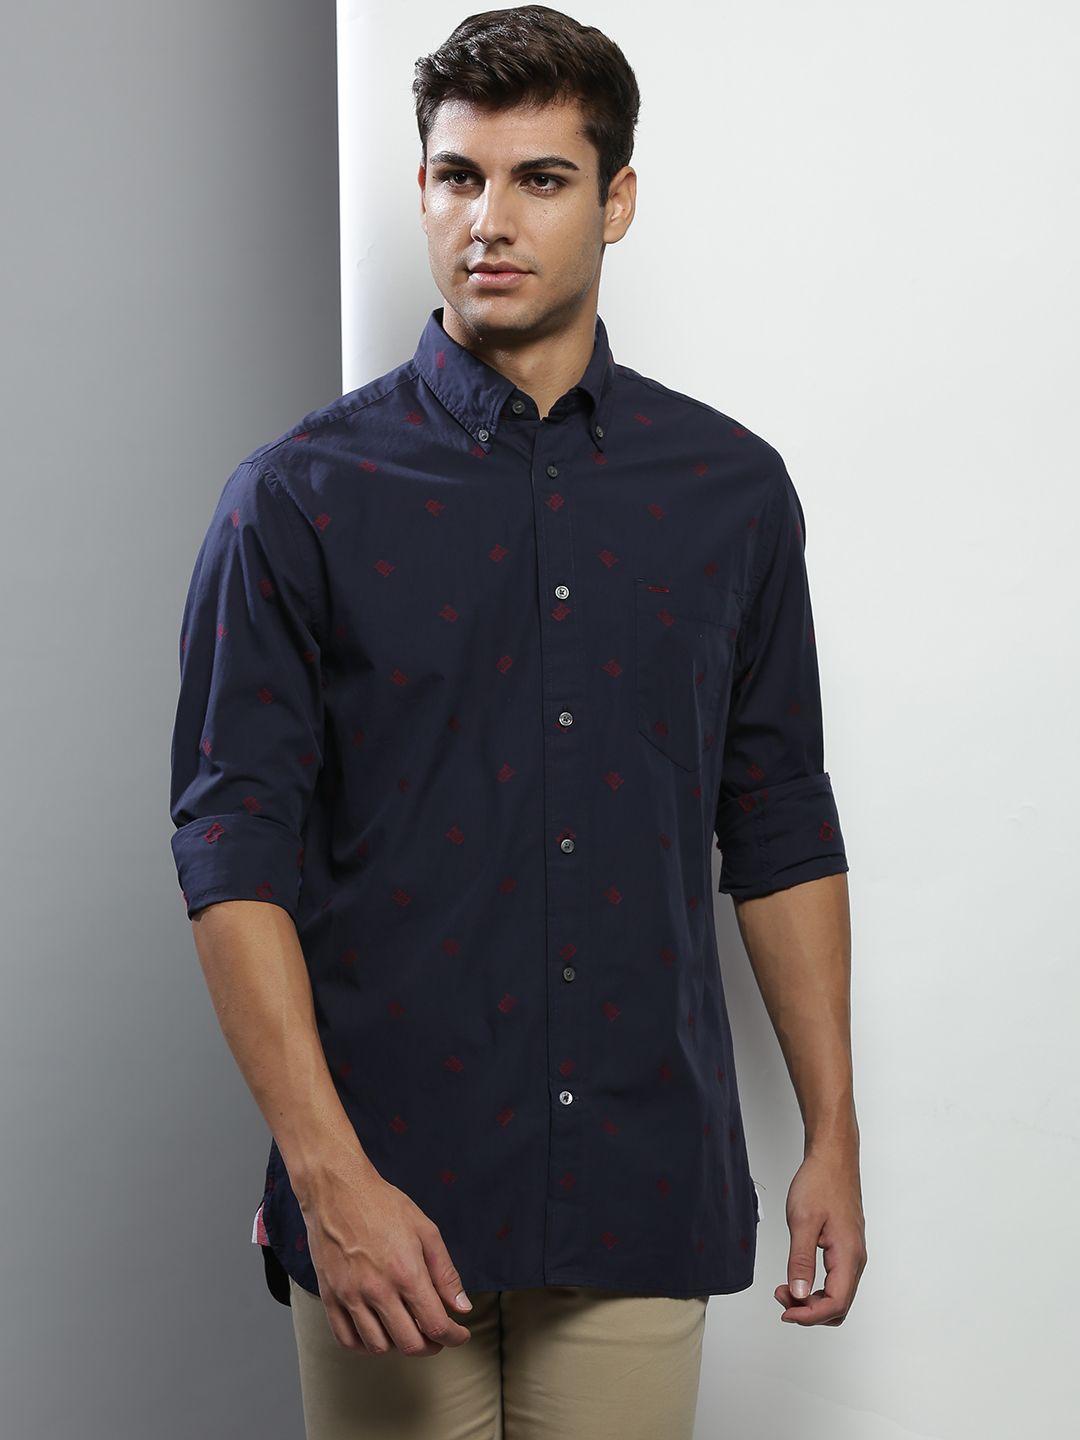 tommy hilfiger men navy blue & maroon printed cotton casual shirt